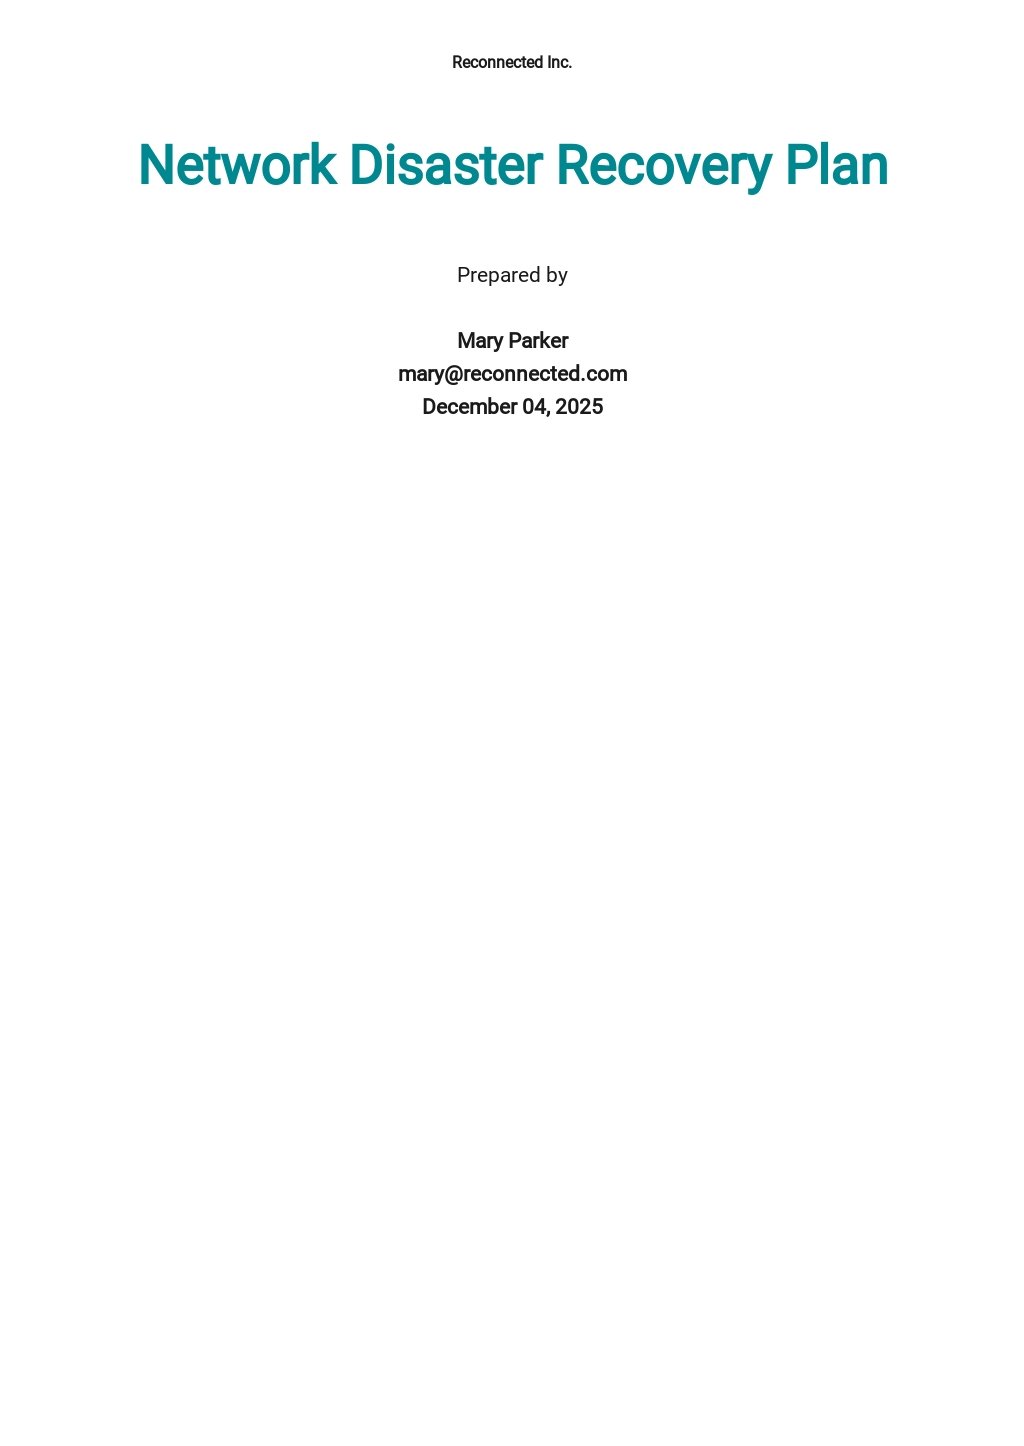 Network Disaster Recovery Plan Template Free.jpe